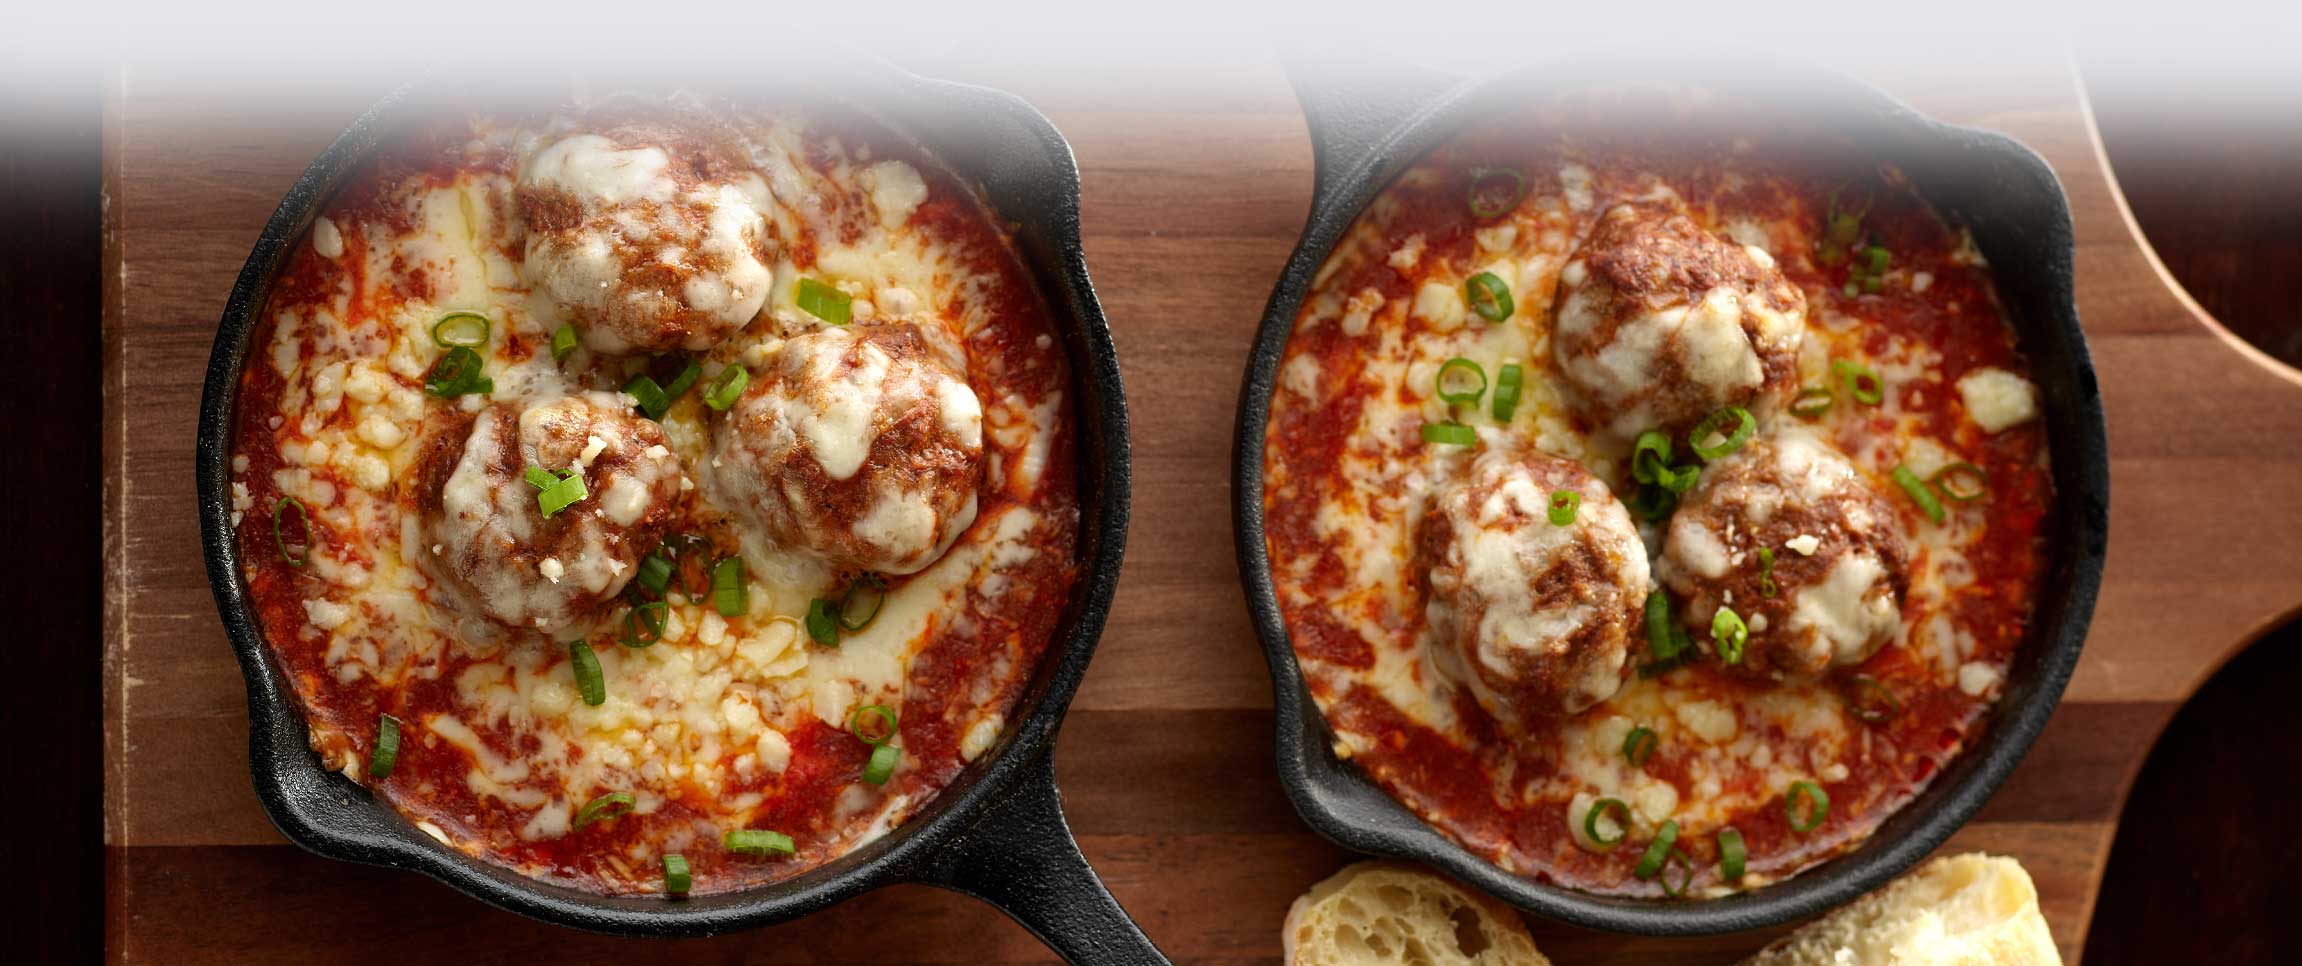 Chipotle Meatball Dip